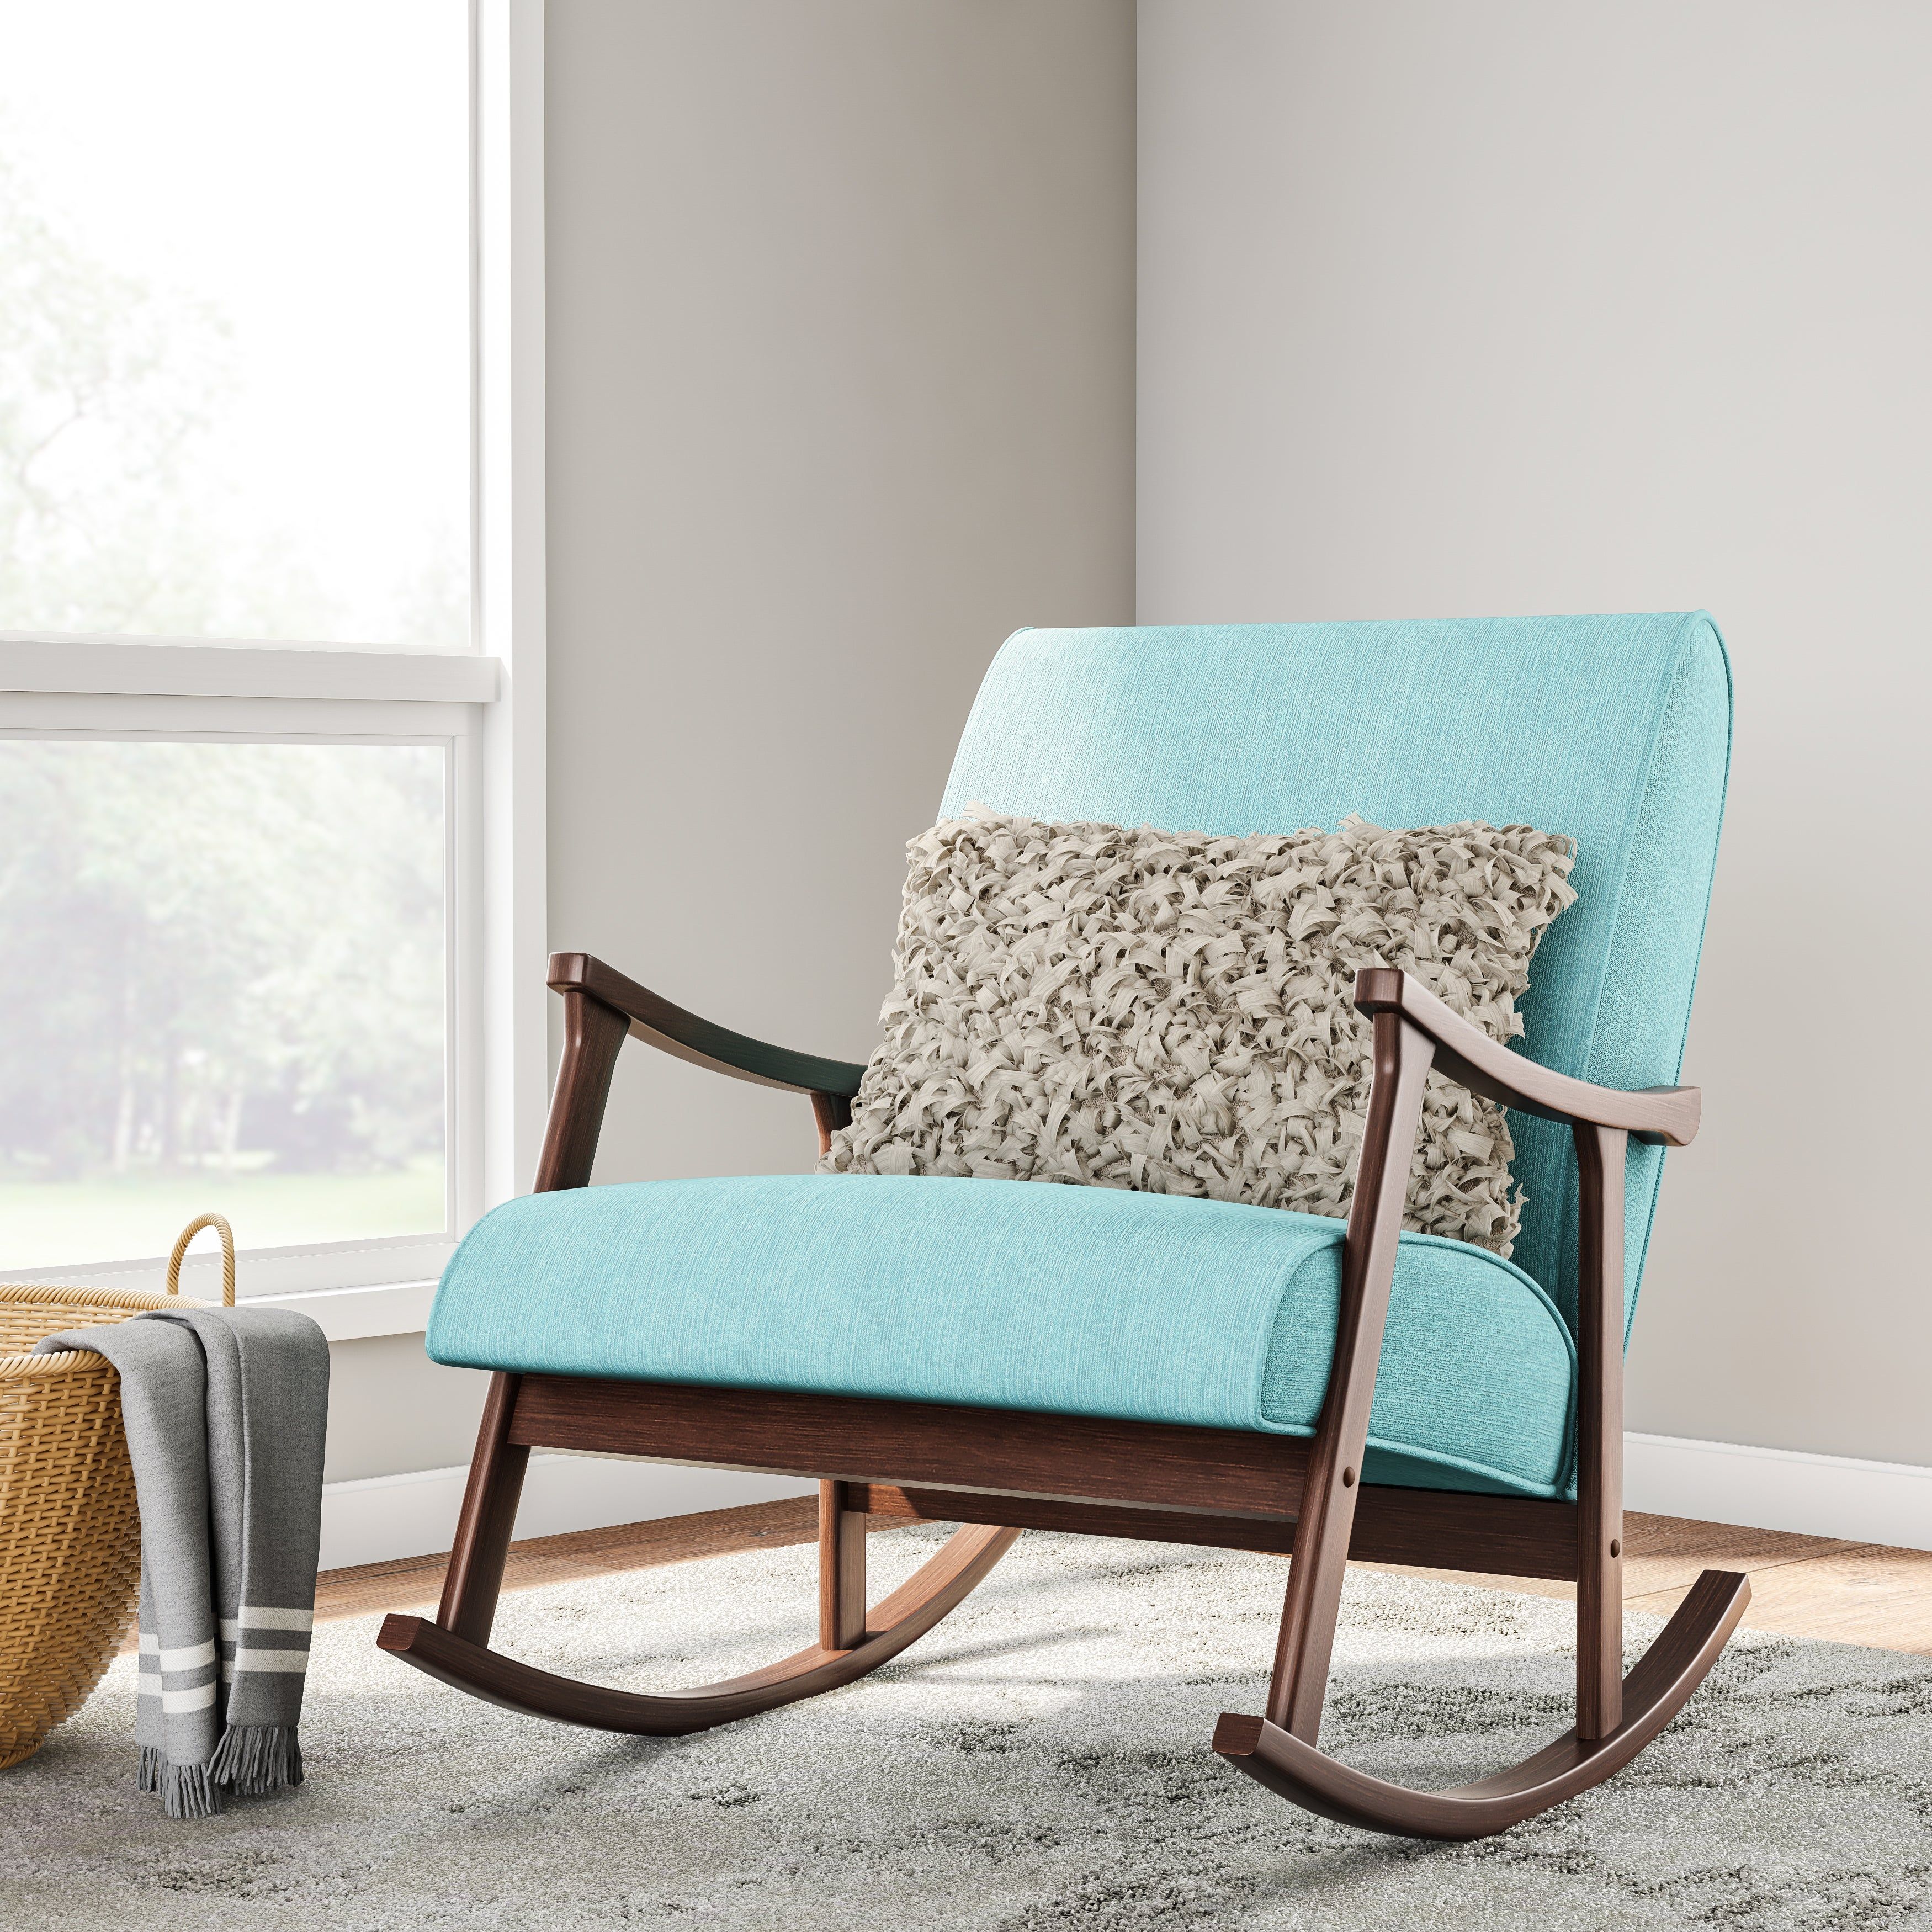 Rocking Chairs, Fabric Living Room Chairs | Shop Online At Pertaining To Judson Traditional Rocking Chairs (View 13 of 20)